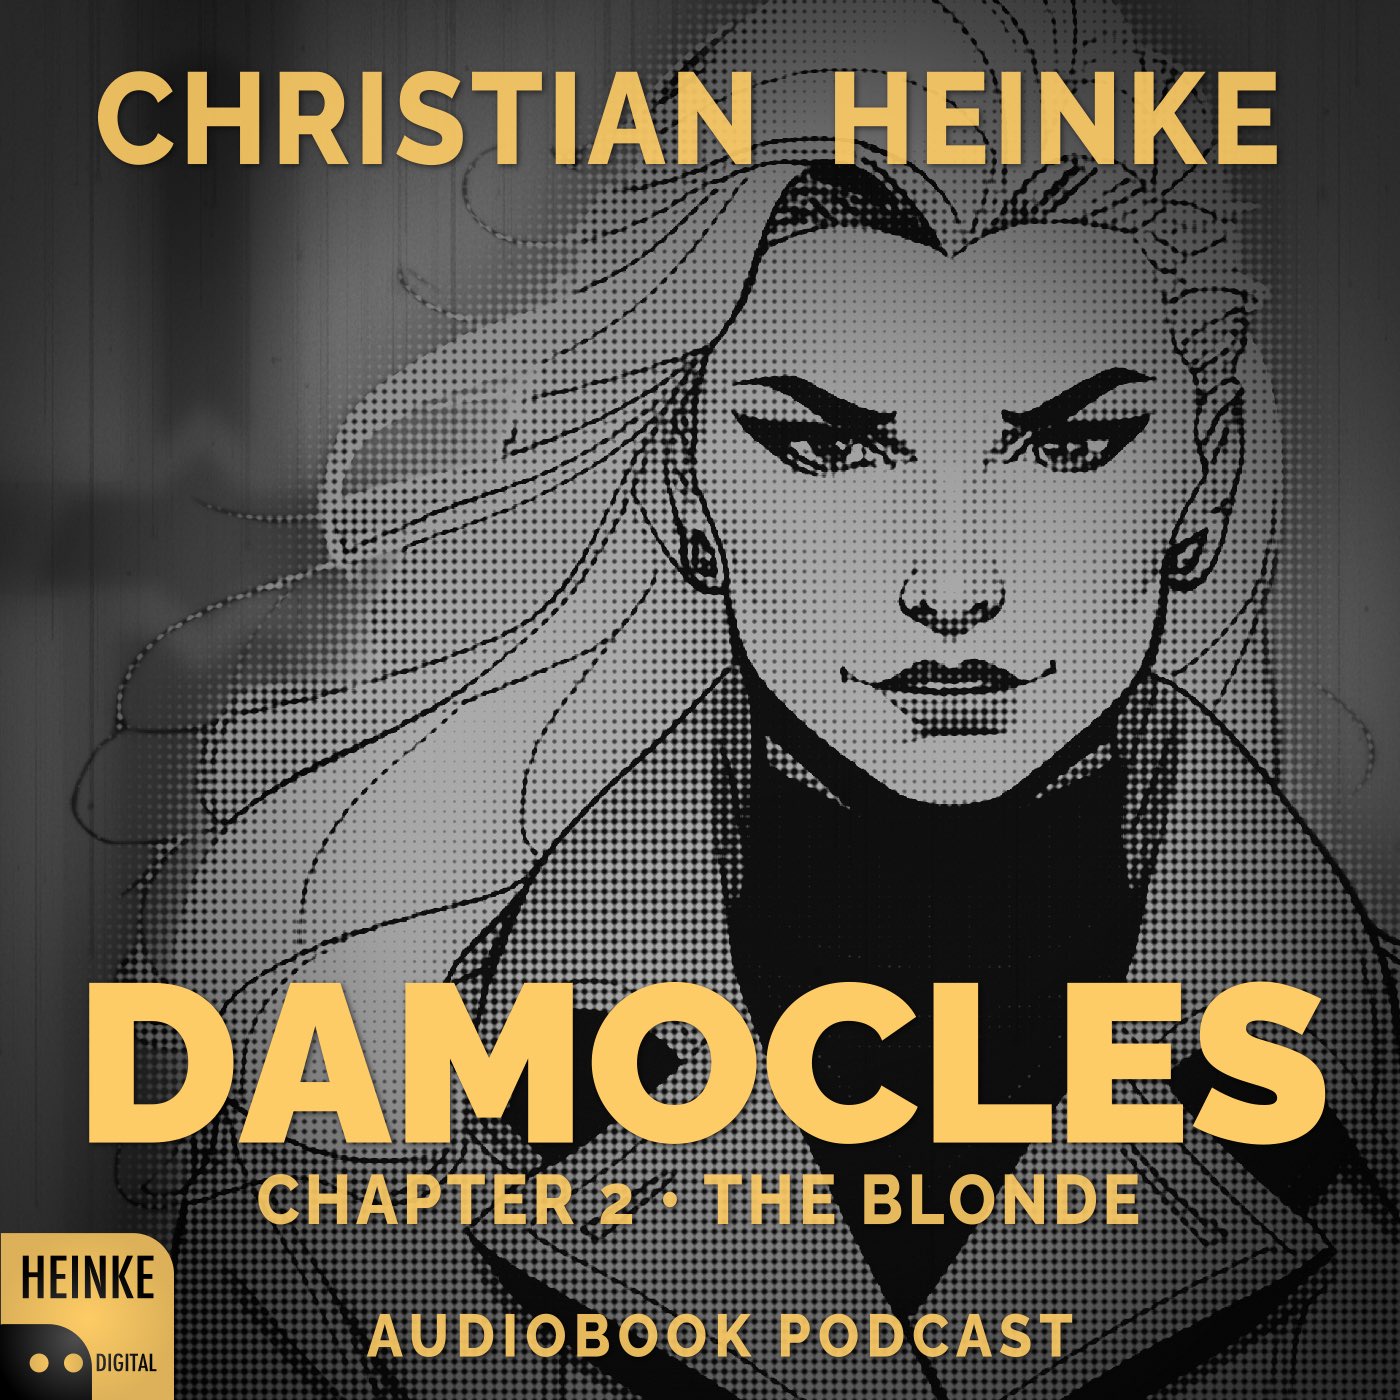 Damocles - Chapter 2 - The Blonde